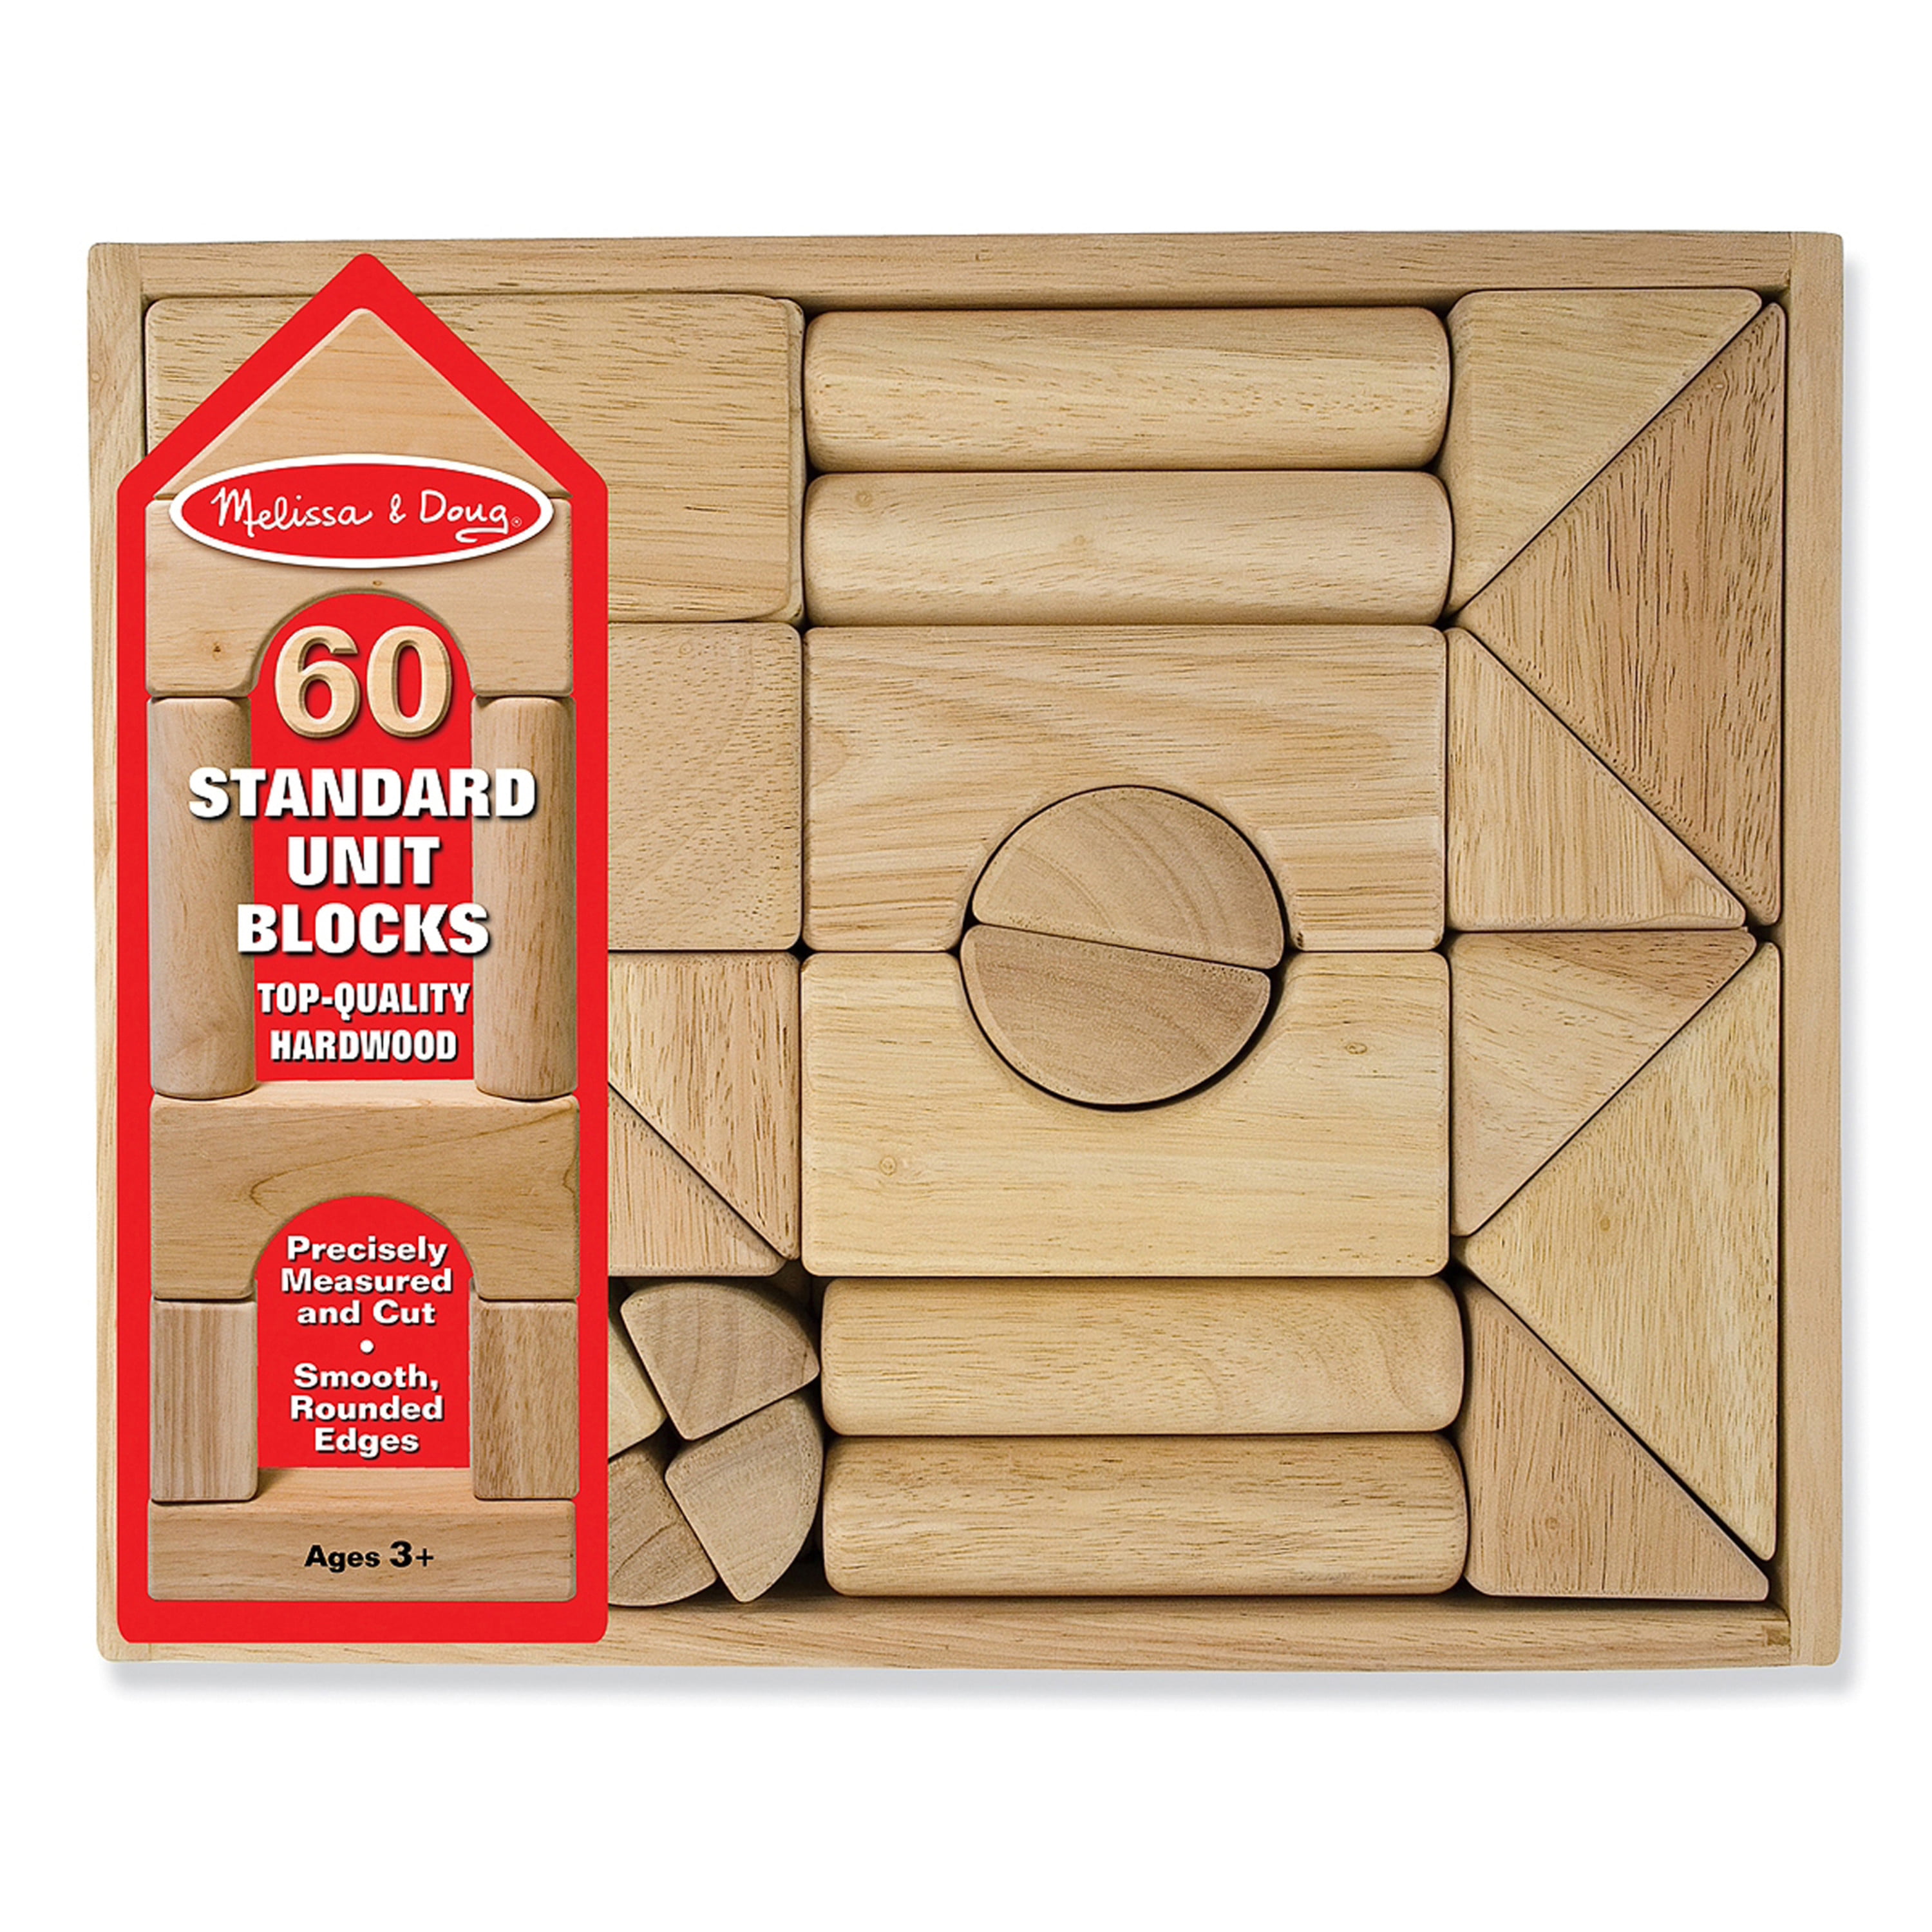 Standard Unit Solid Wood Building Blocks With Wooden Storage Tray 60 pcs 